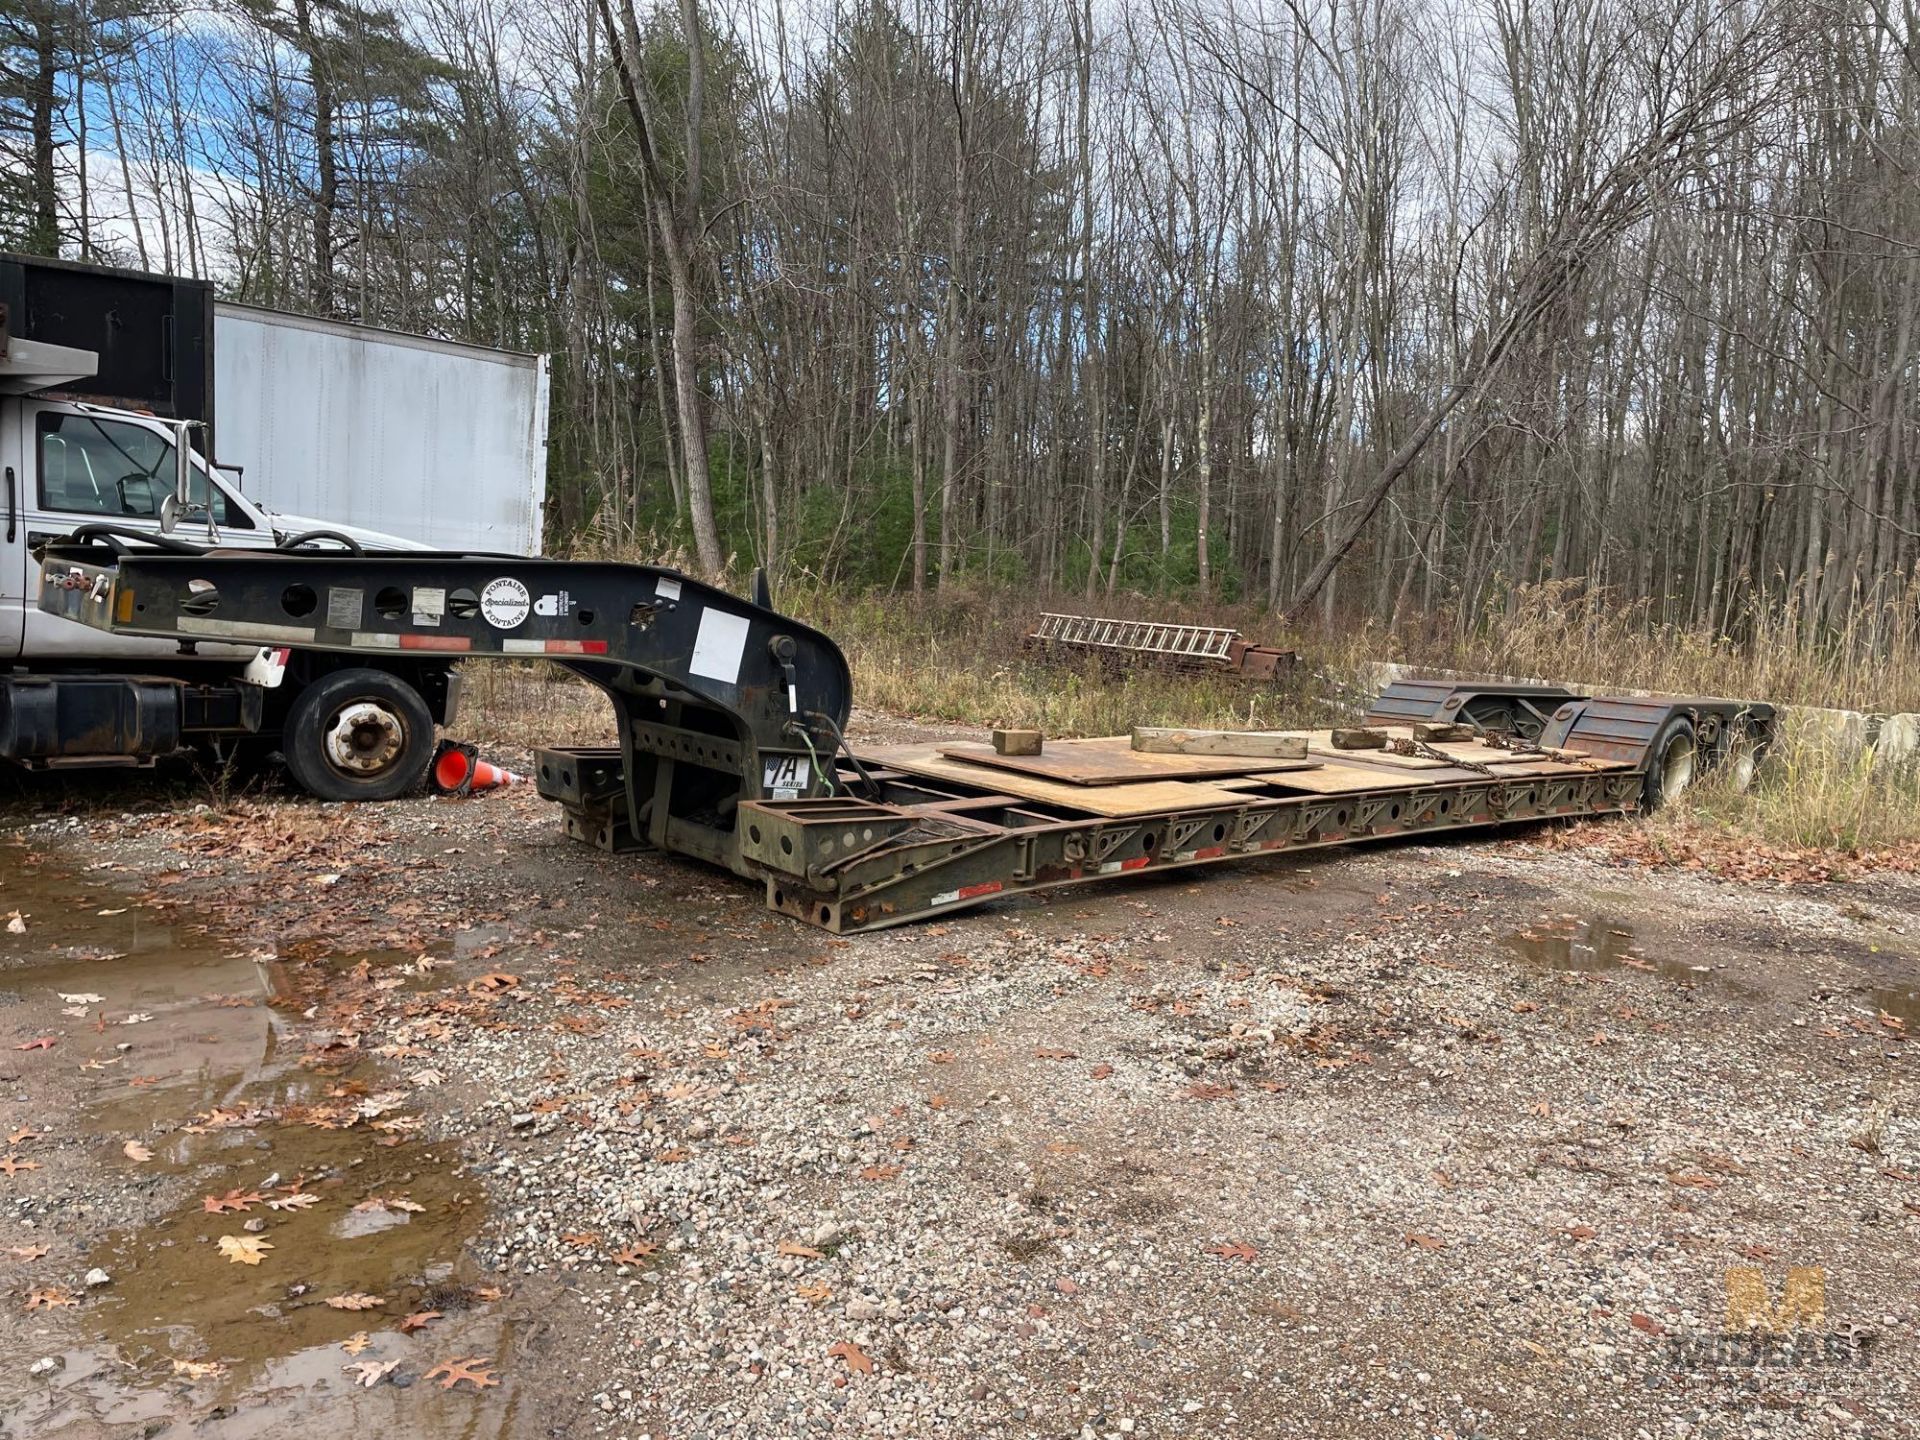 1999 Fontaine 35 Ton RGN Trailer, vin 4LF454529X3507975 - Image 2 of 8